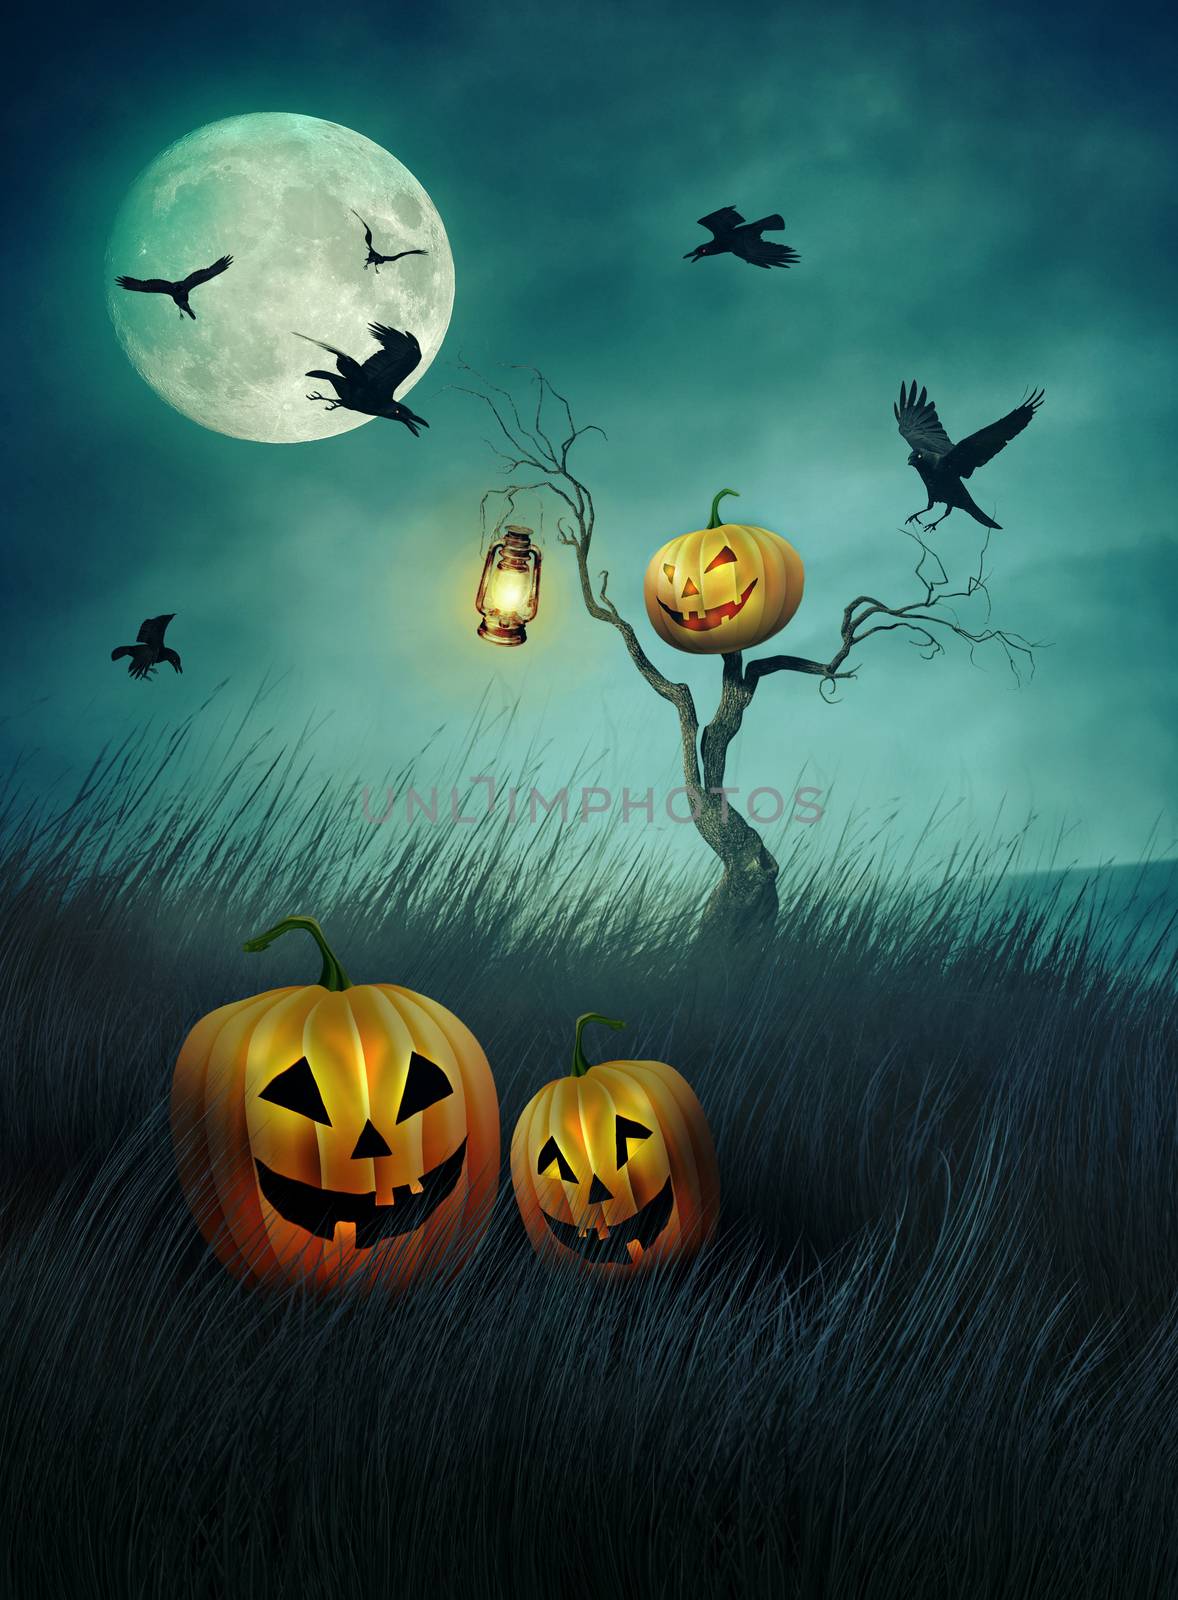 Pumpkin scarecrow in fields of  grass at night by Sandralise